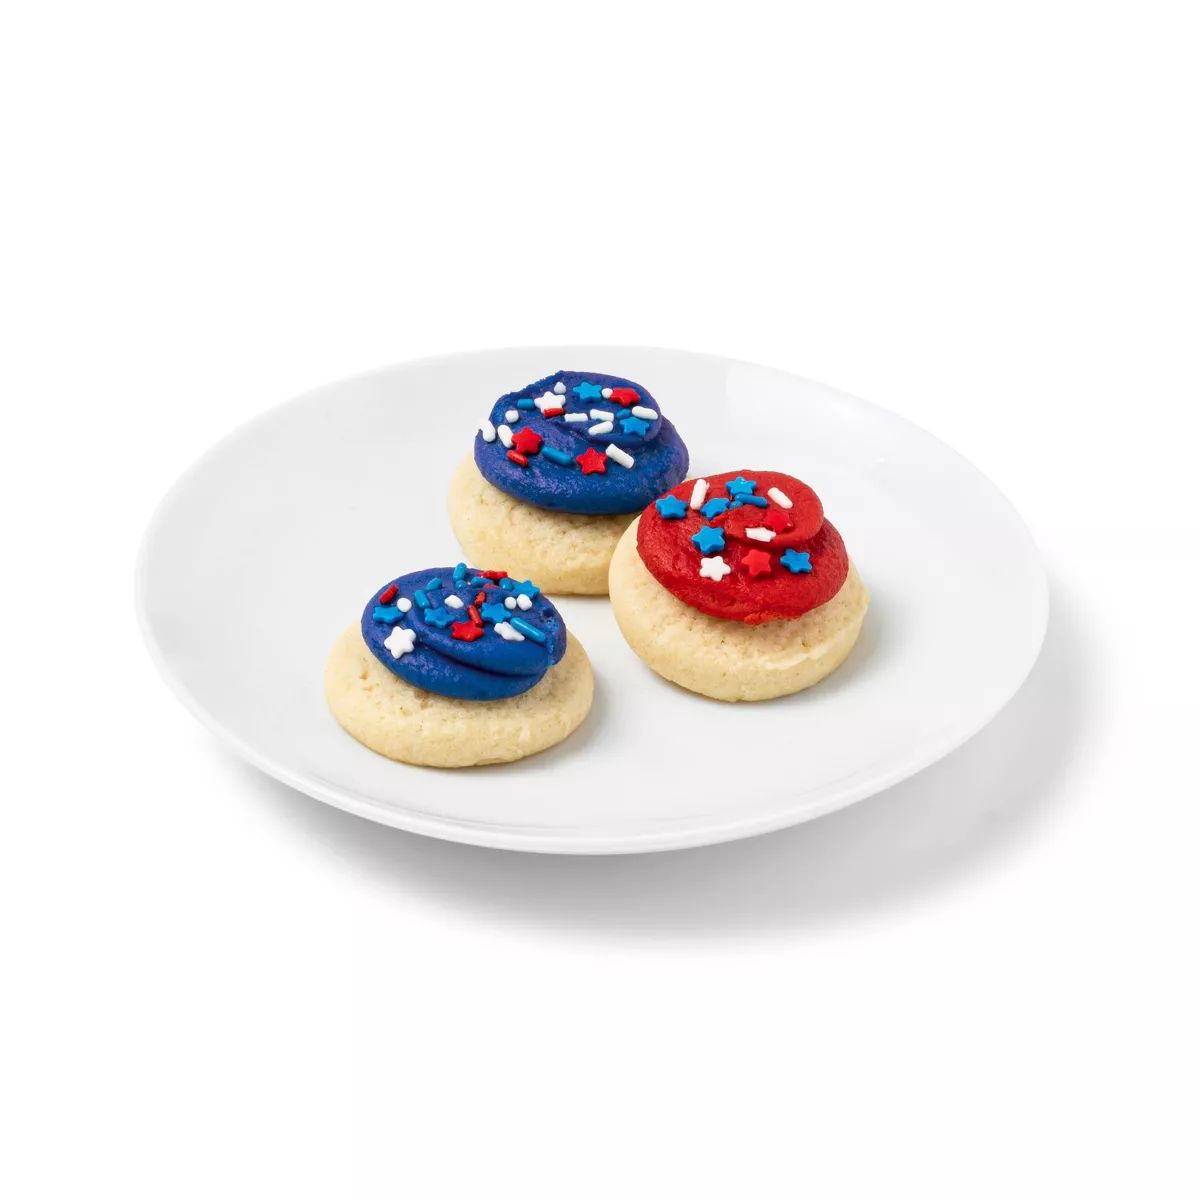 Patriotic Red & Blue Mini Frosted Sugar Cookies - 9.4oz/18ct - Favorite Day™ | Target